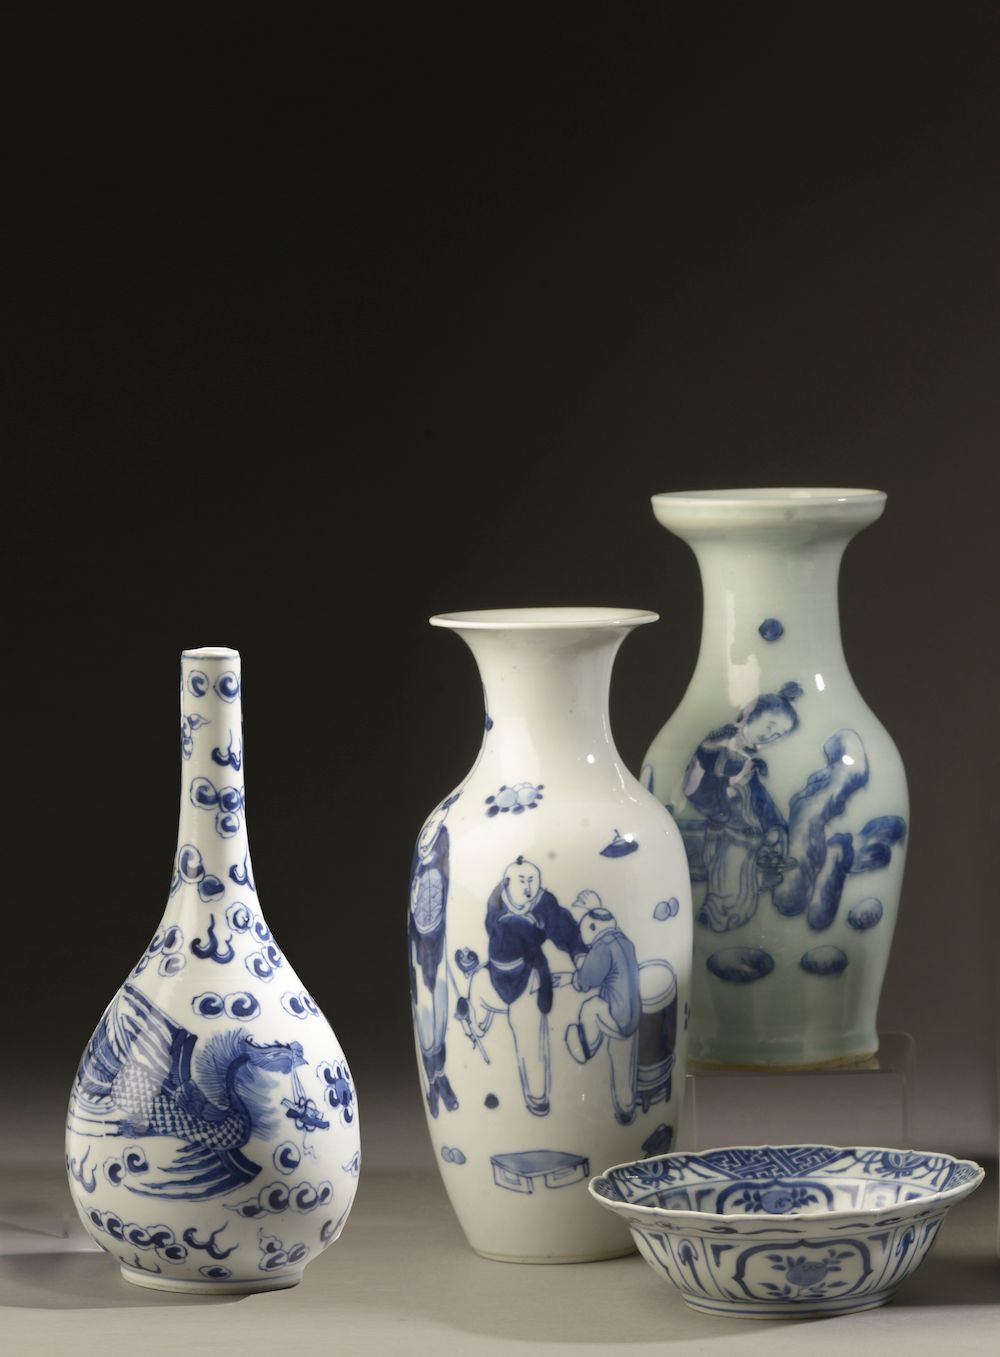 Null CHINA - Circa 1900.

A set of blue and white porcelain decorated with chara&hellip;